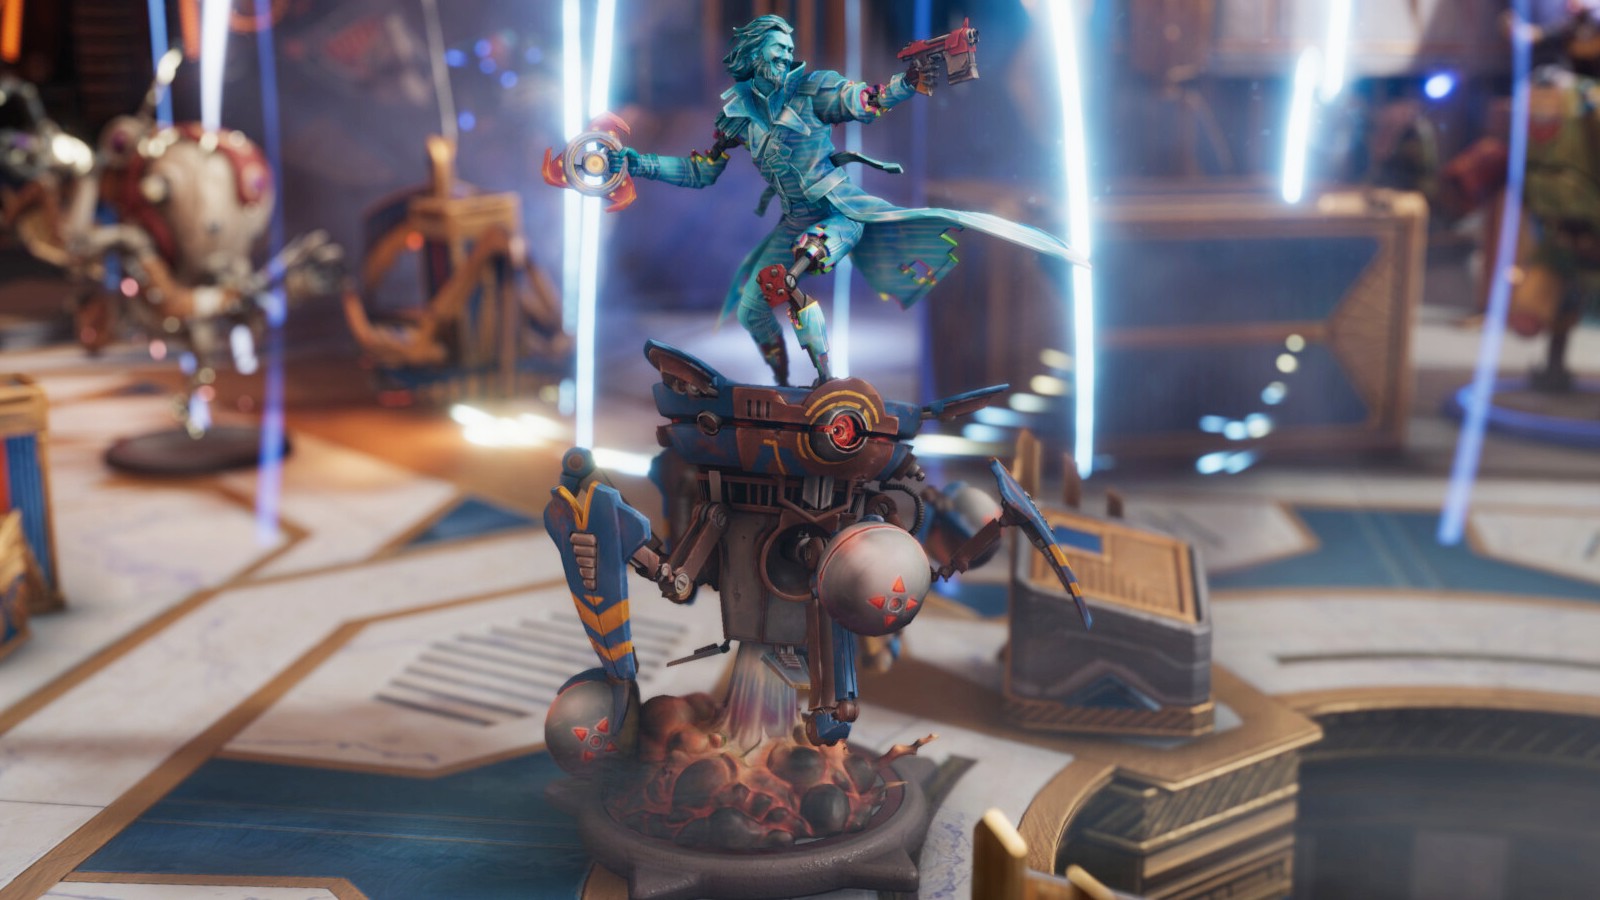 Moonbreaker turns traditional tabletop video games into digital turn-based chaos